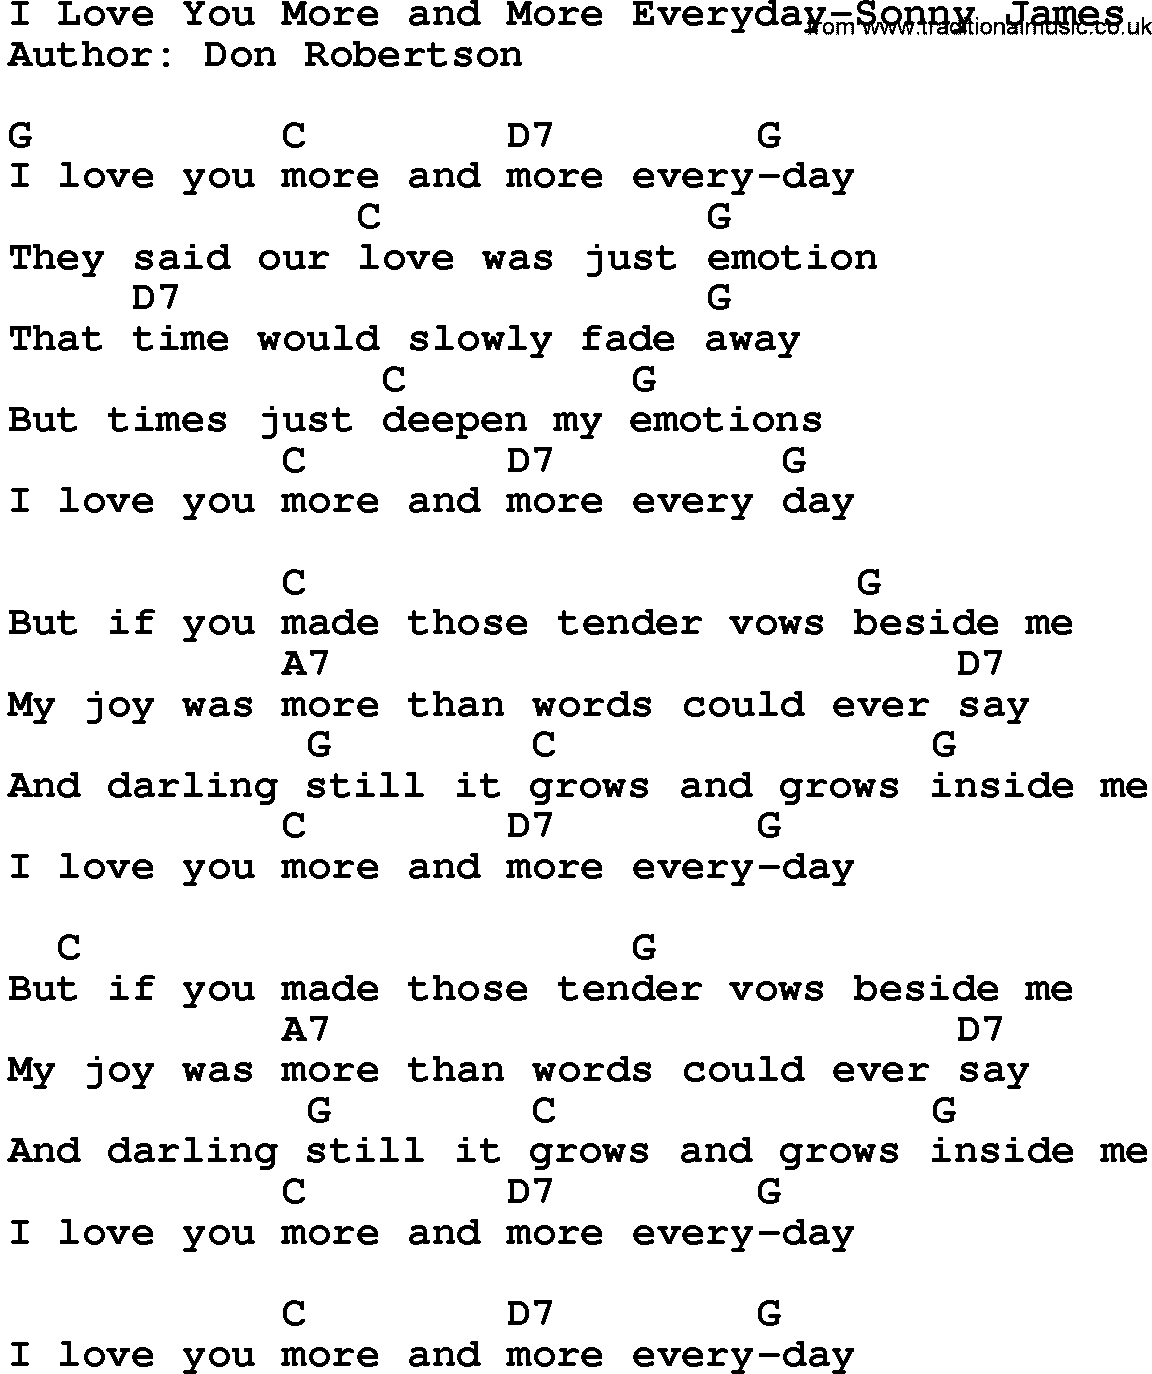 Country music song: I Love You More And More Everyday-Sonny James lyrics and chords